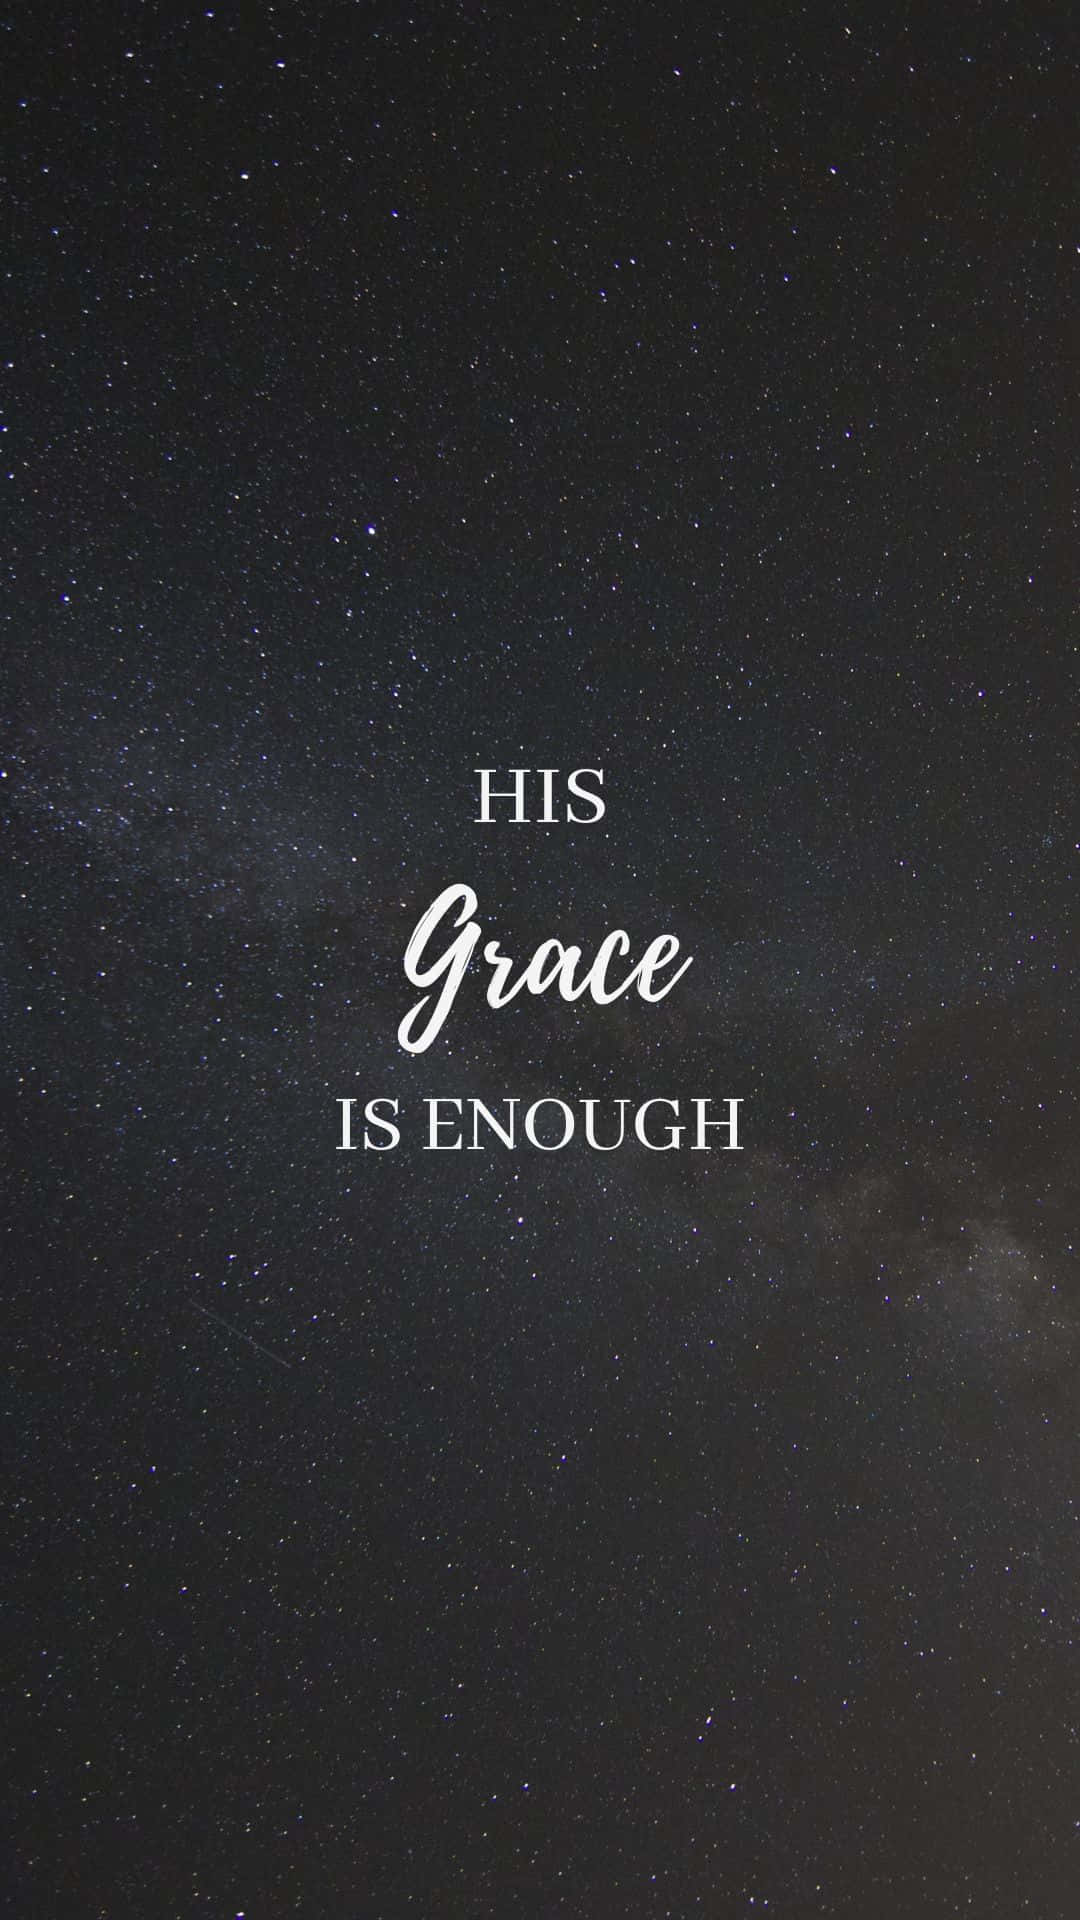 Cool Christian Quote On Stars Background